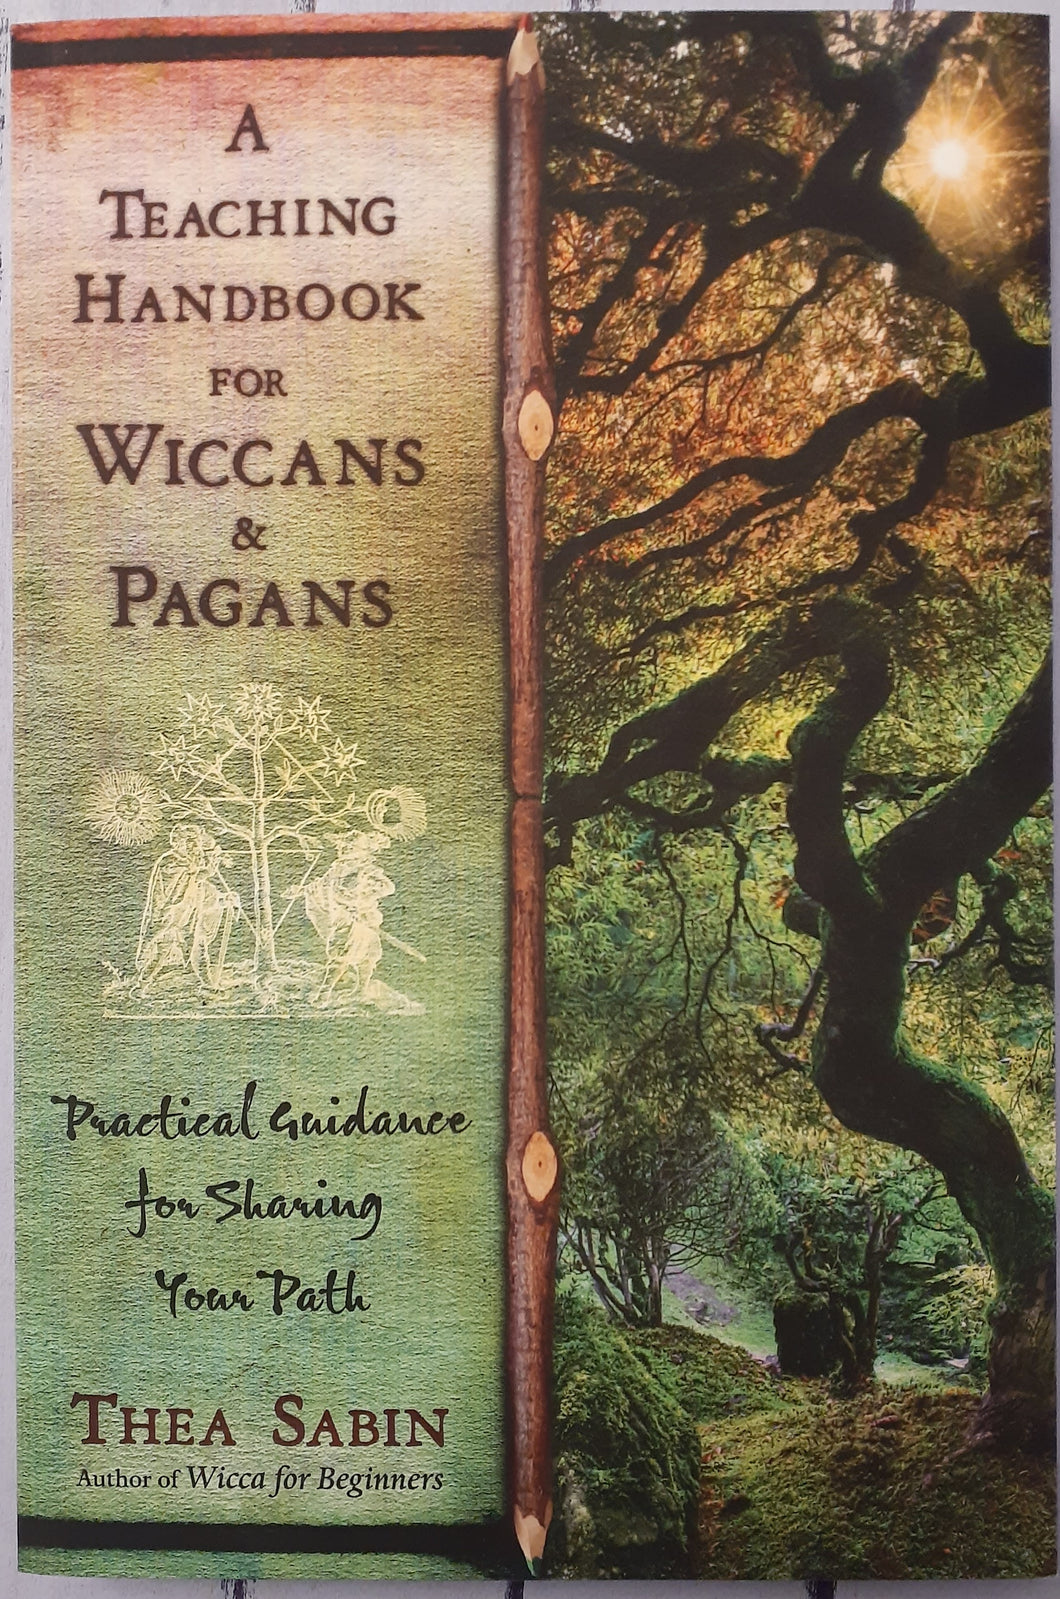 A Teaching Handbook for Wiccans & Pagans: Practical Guidance for Sharing Your Path